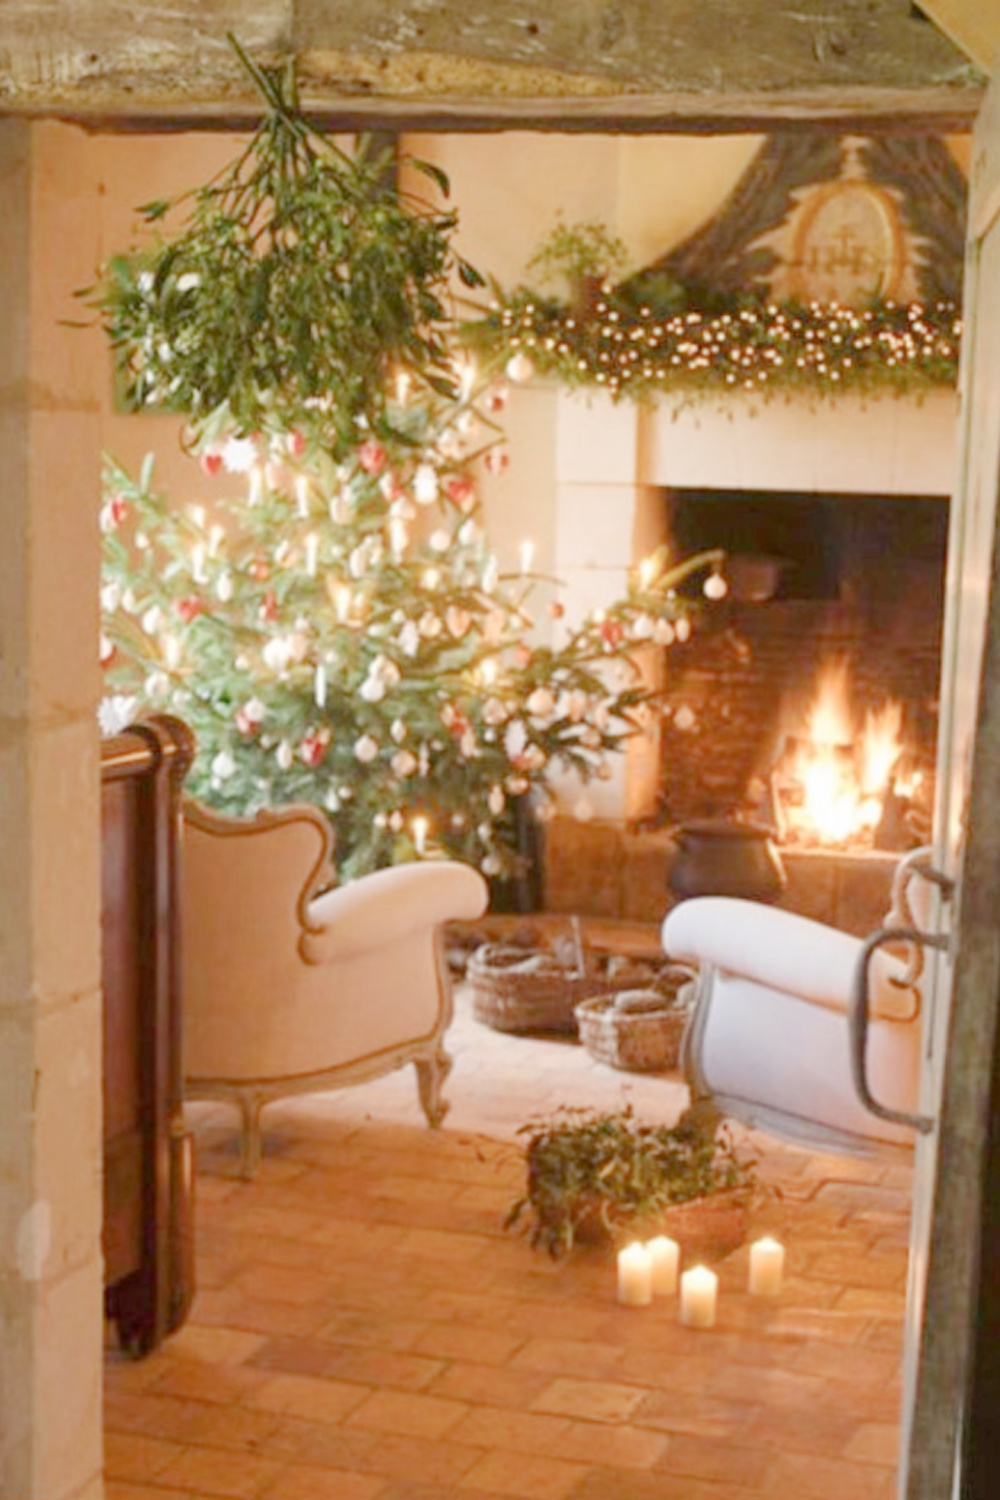 Christmas decorated French farmhouse with Christmas tree, fire blazing, candles, and elegant Old World style - @loirevalleycooking. #frenchchristmas #frenchholiday #christmasdecorating